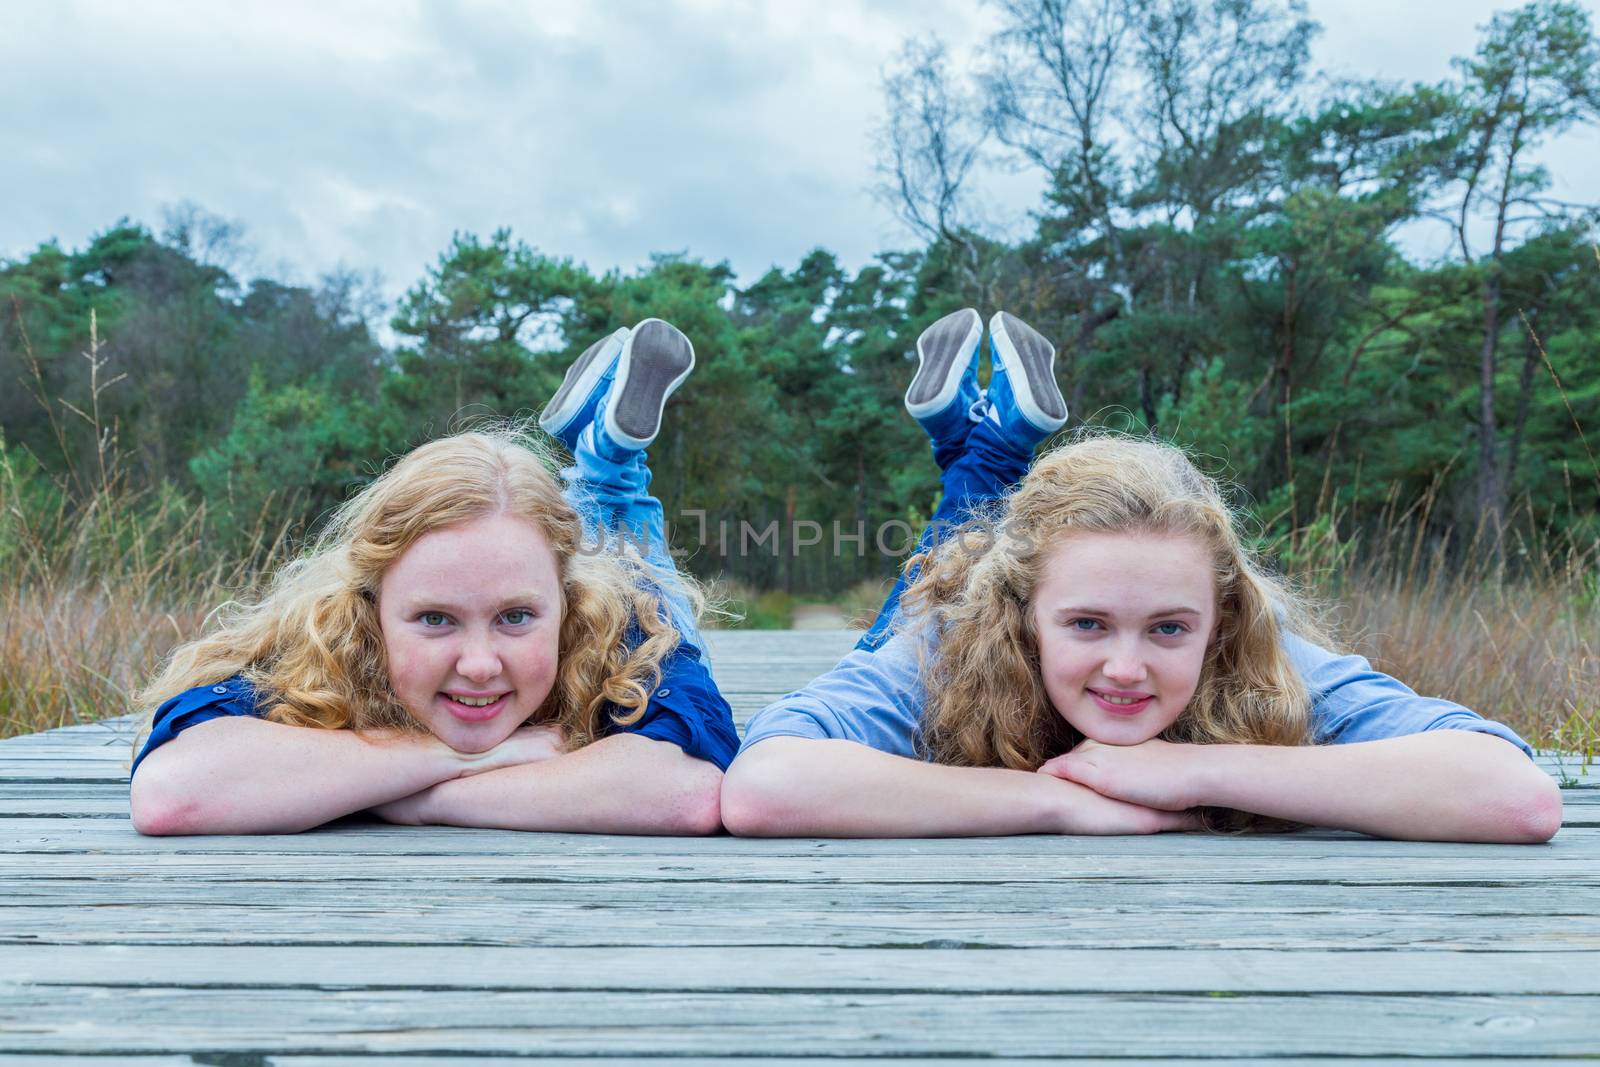 Two girls lying on wooden path in nature by BenSchonewille